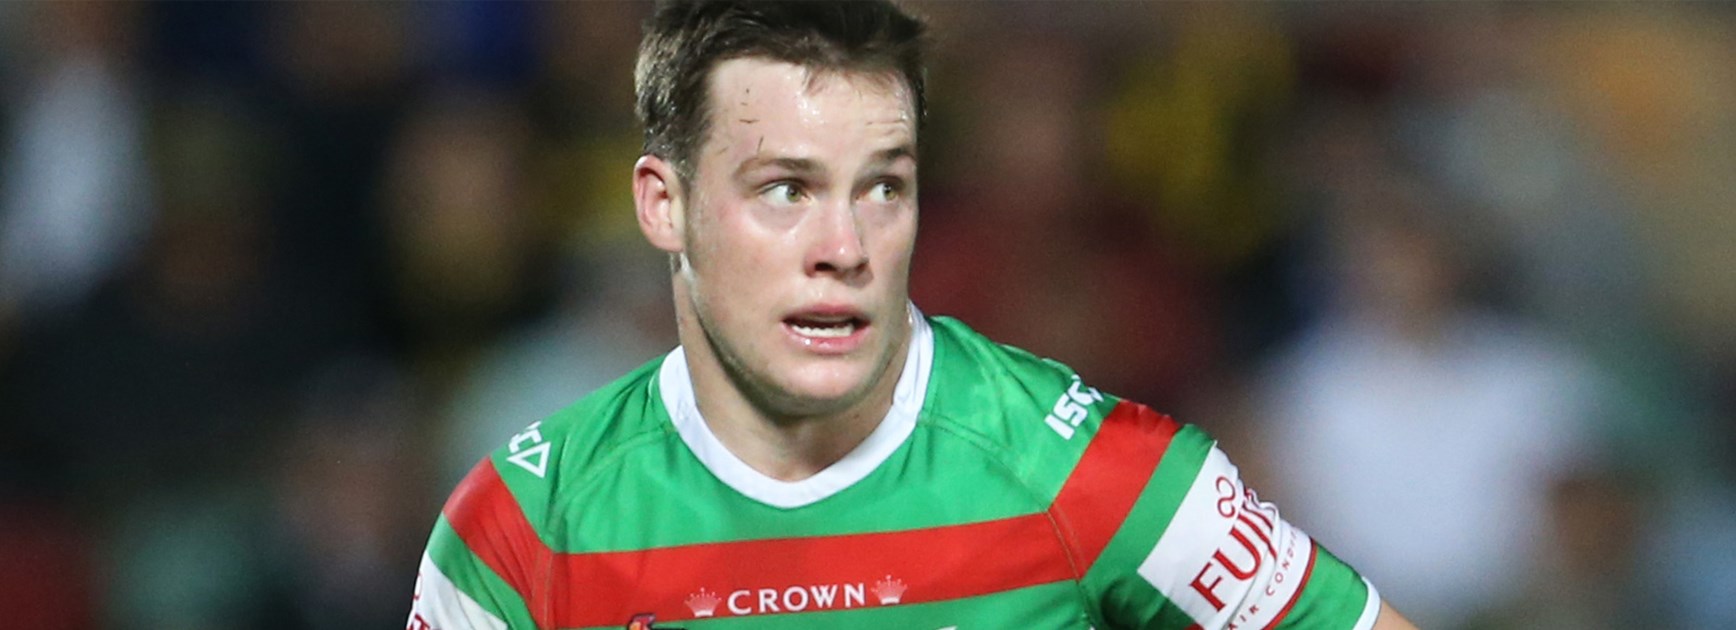 Luke Keary could be facing a shoulder charge ban after South Sydney's win over the Cowboys.